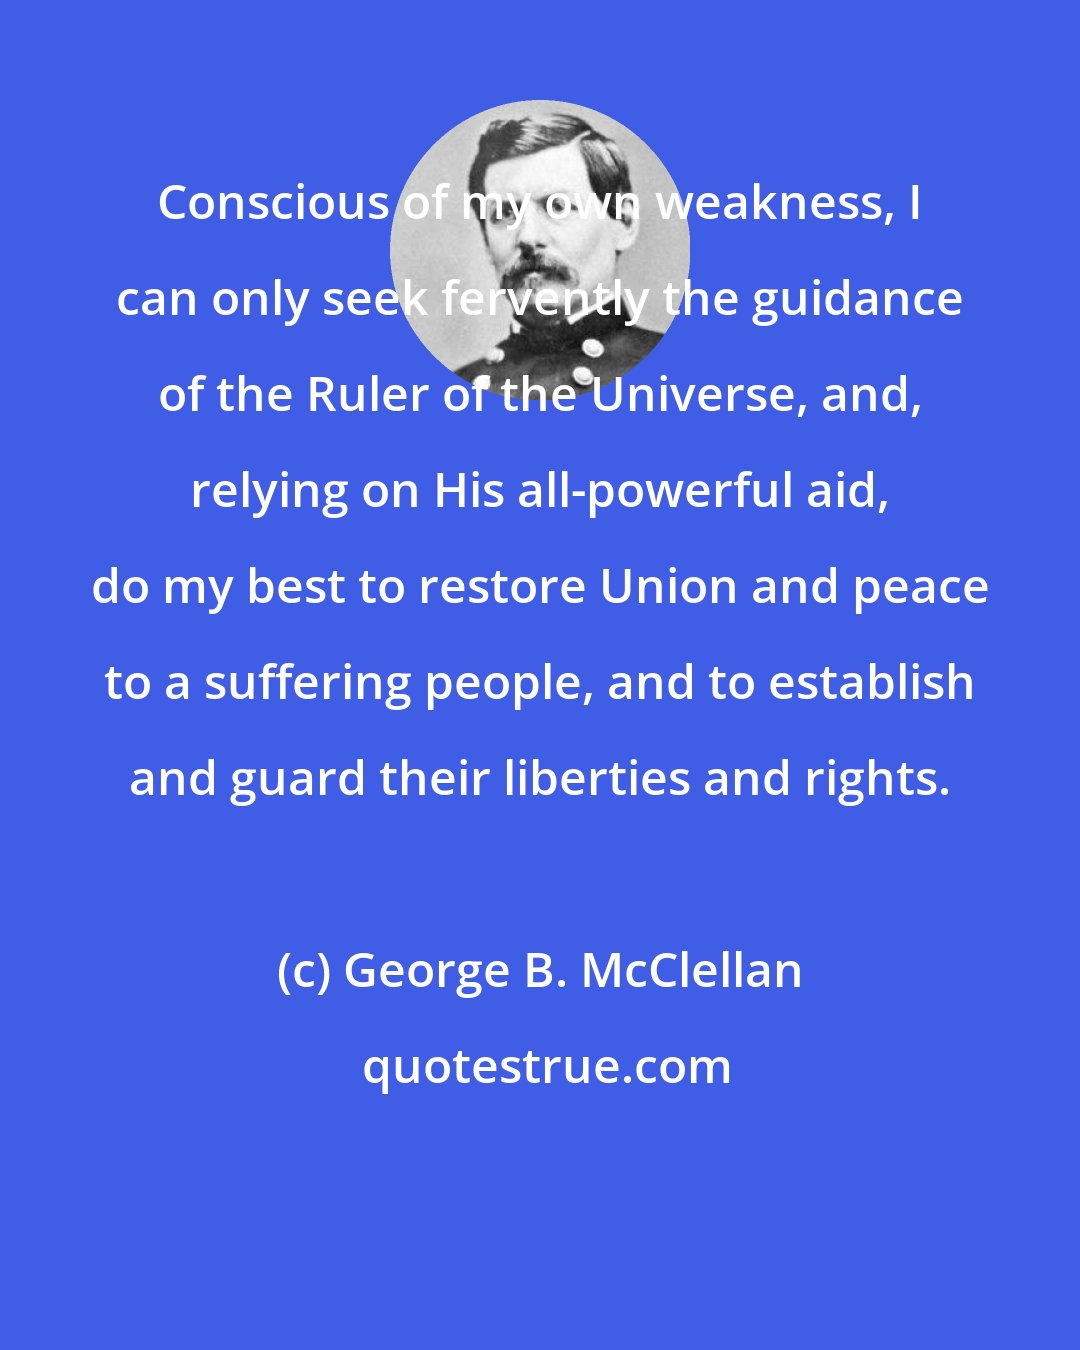 George B. McClellan: Conscious of my own weakness, I can only seek fervently the guidance of the Ruler of the Universe, and, relying on His all-powerful aid, do my best to restore Union and peace to a suffering people, and to establish and guard their liberties and rights.